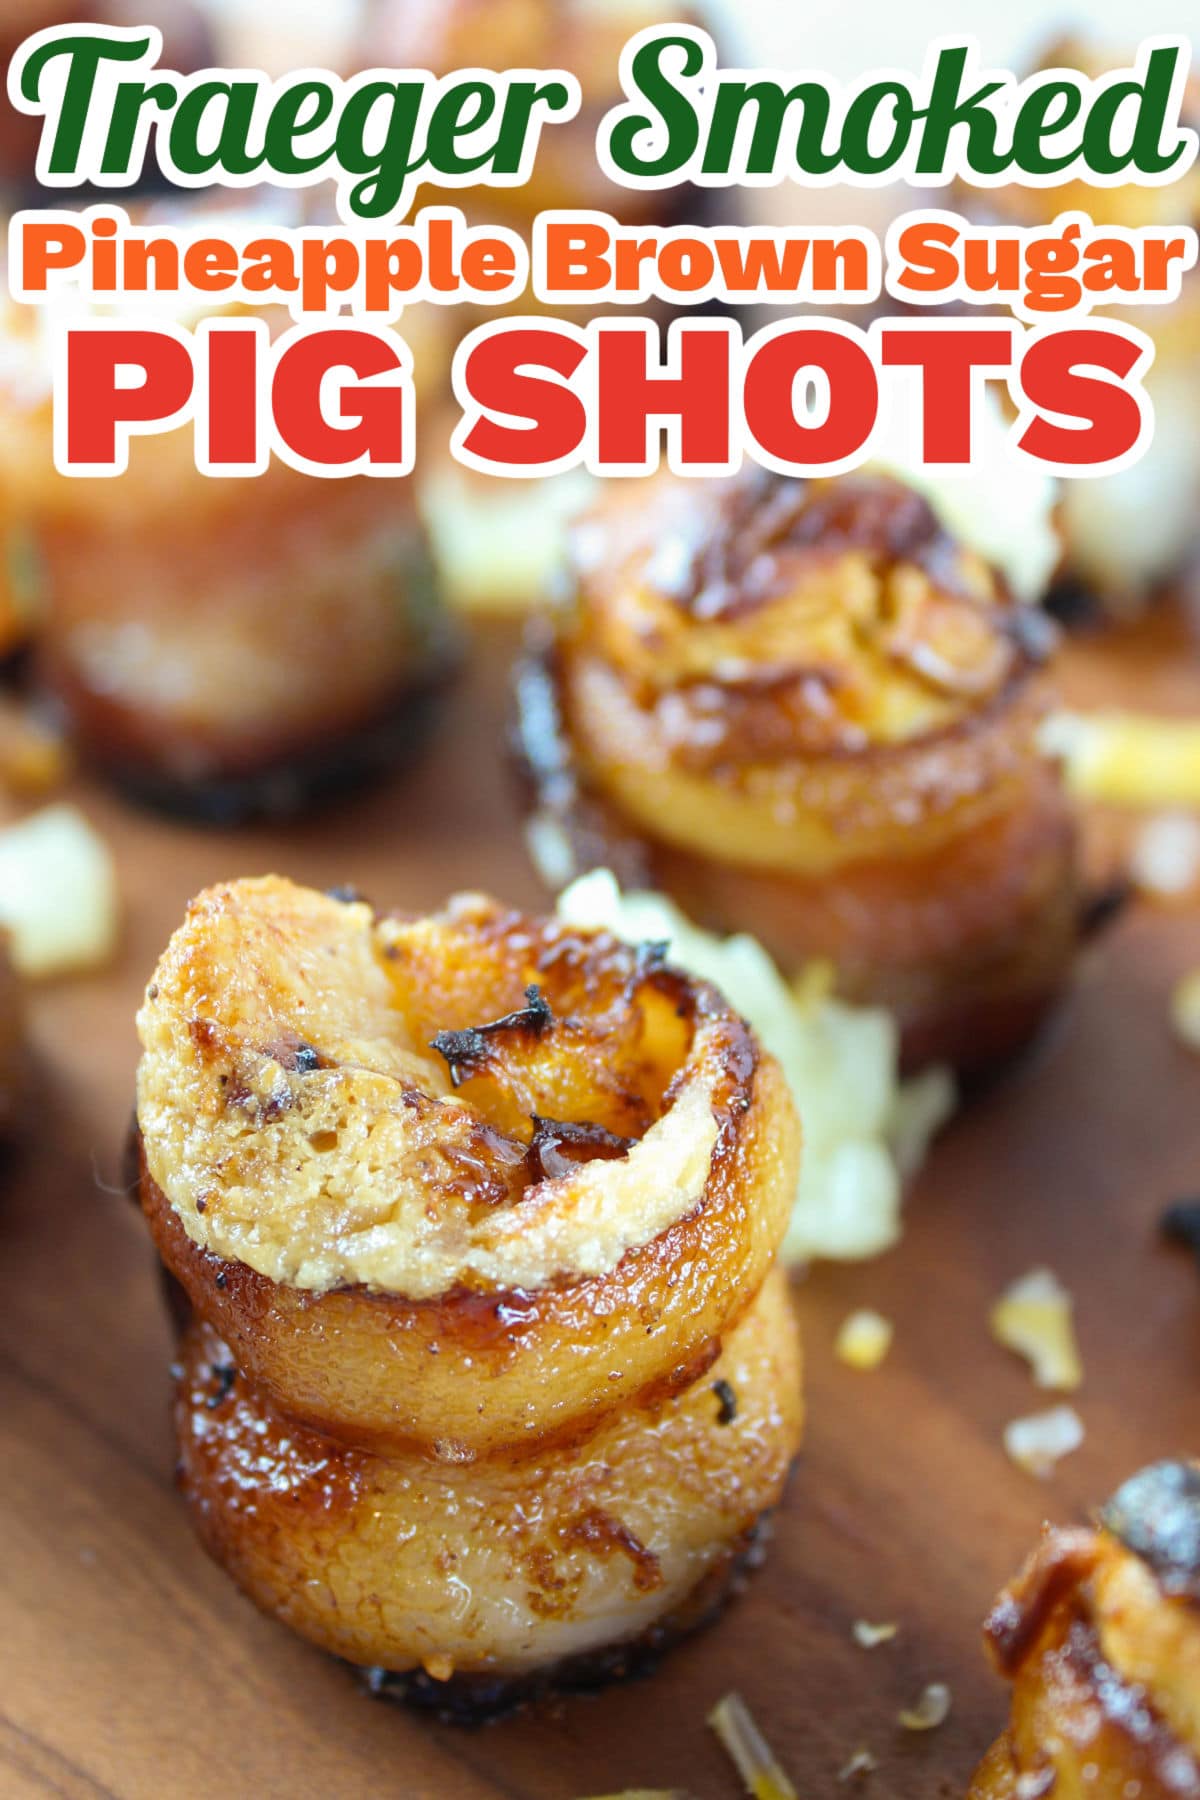 Smoked Pig Shots on the Traeger are the latest and greatest appetizer! Bacon "shot glasses" filled with smoked sausage, cream cheese and more! These are great for any summer barbecue, tailgating or holiday get-together.  via @foodhussy